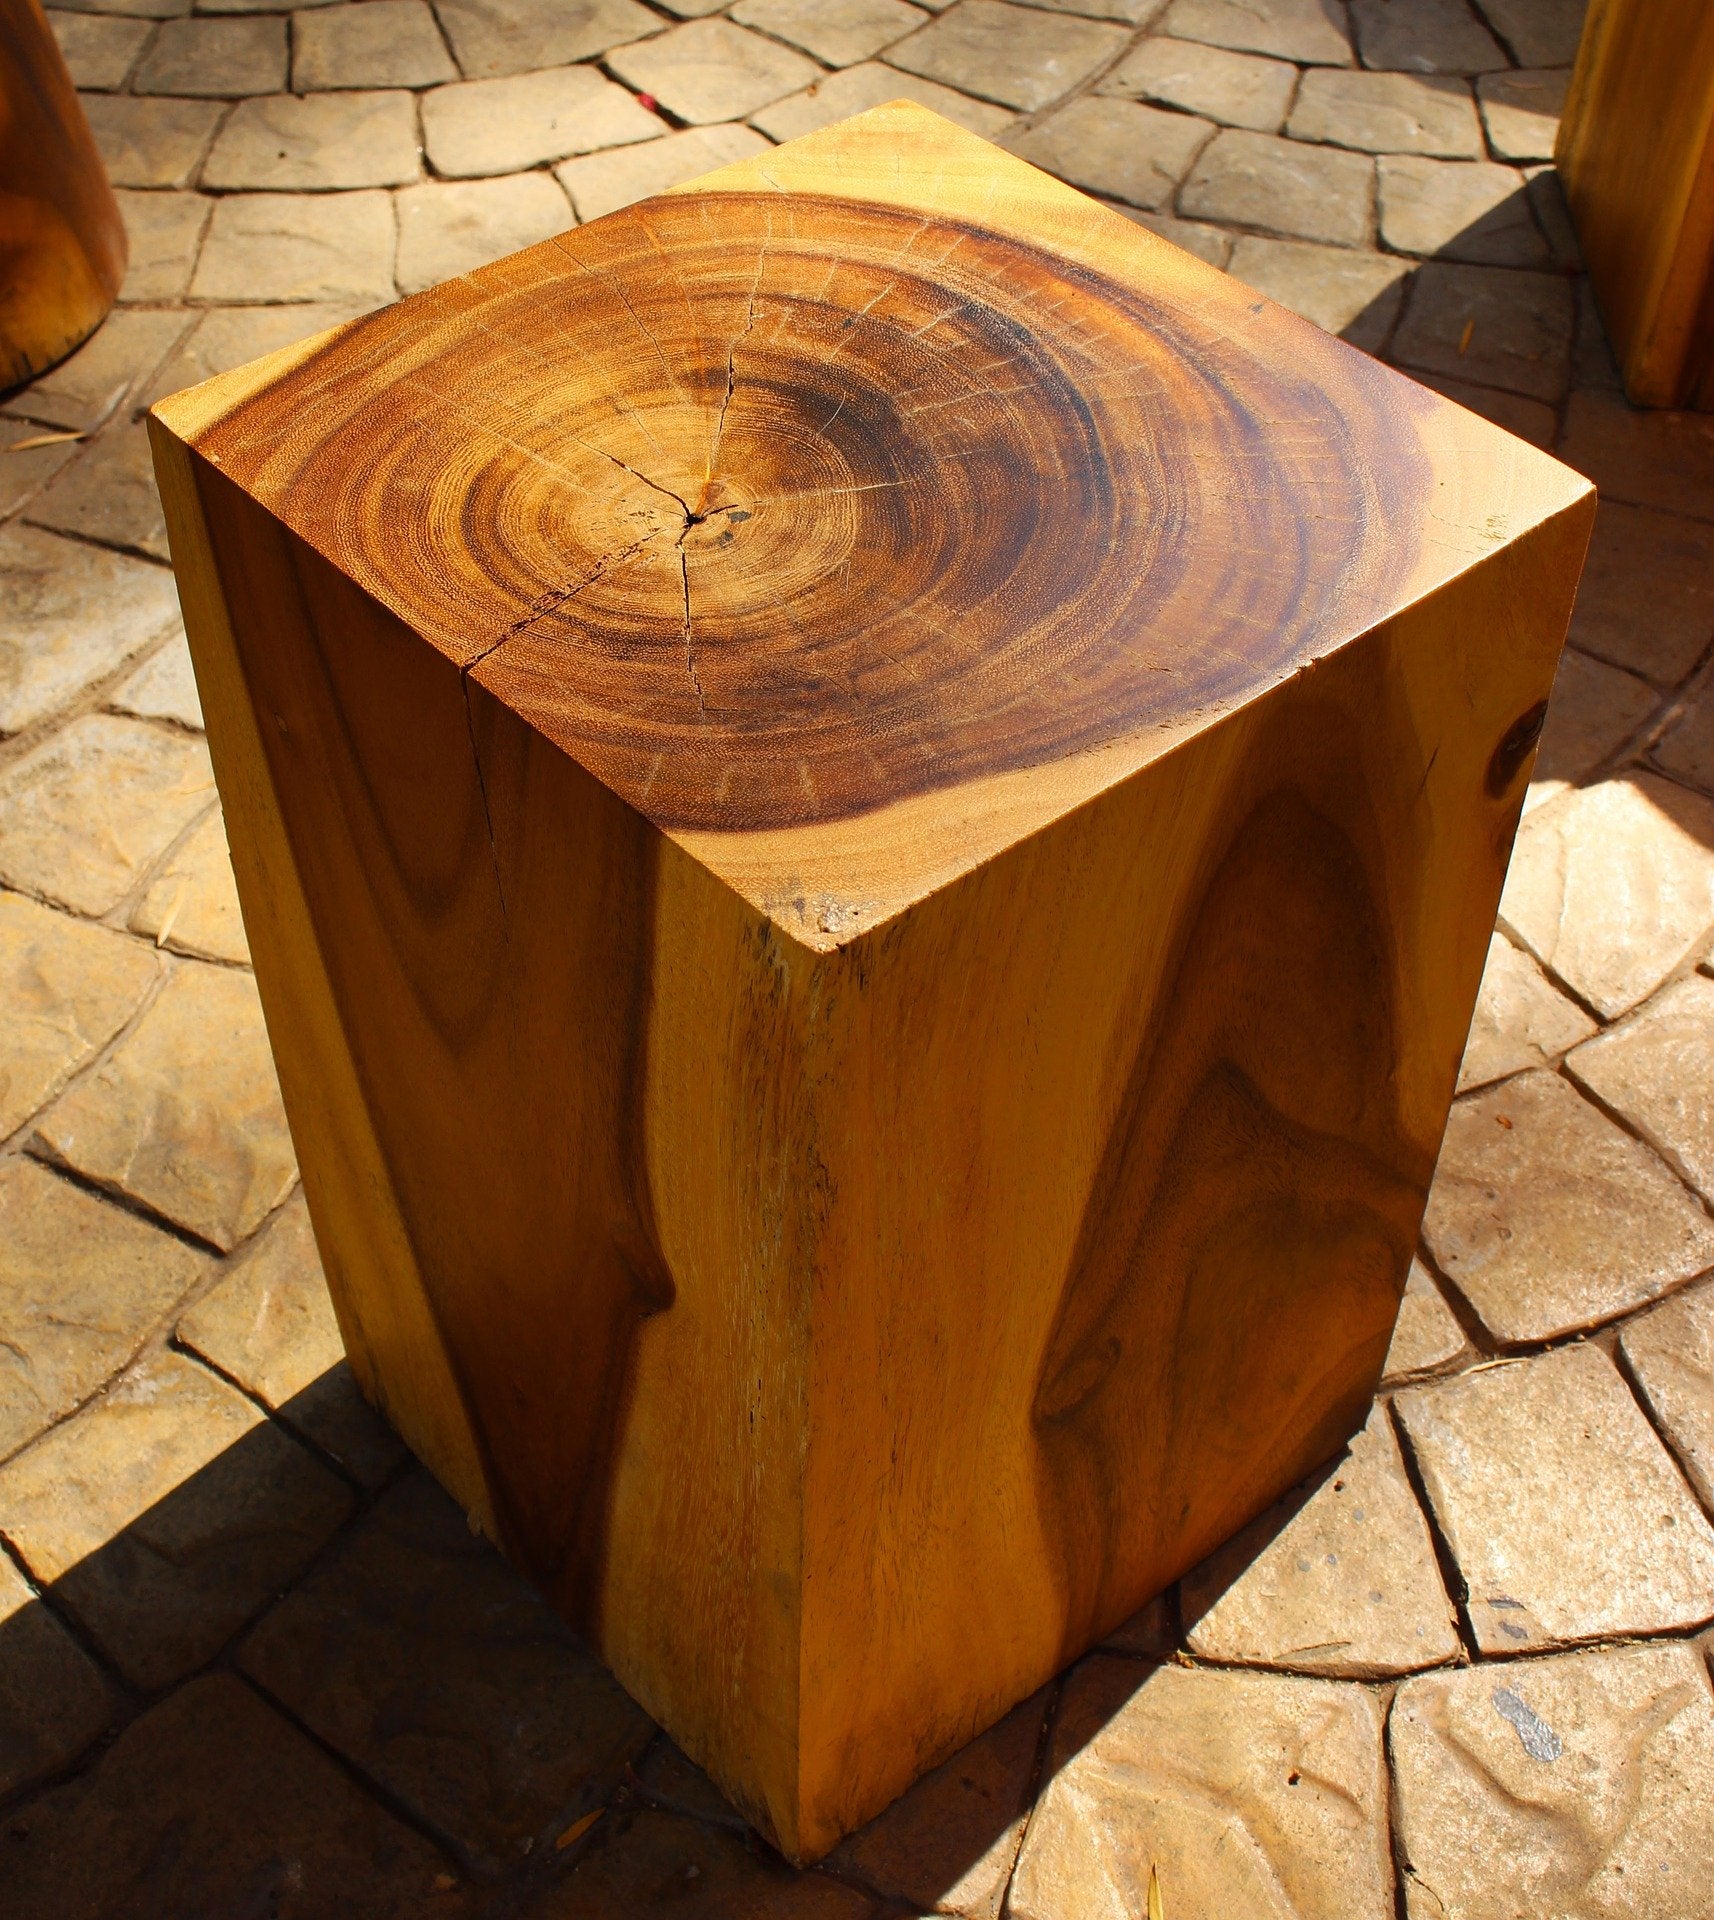 3 Things You Need to Know About Live Edge Wood Furniture– Artisan Born